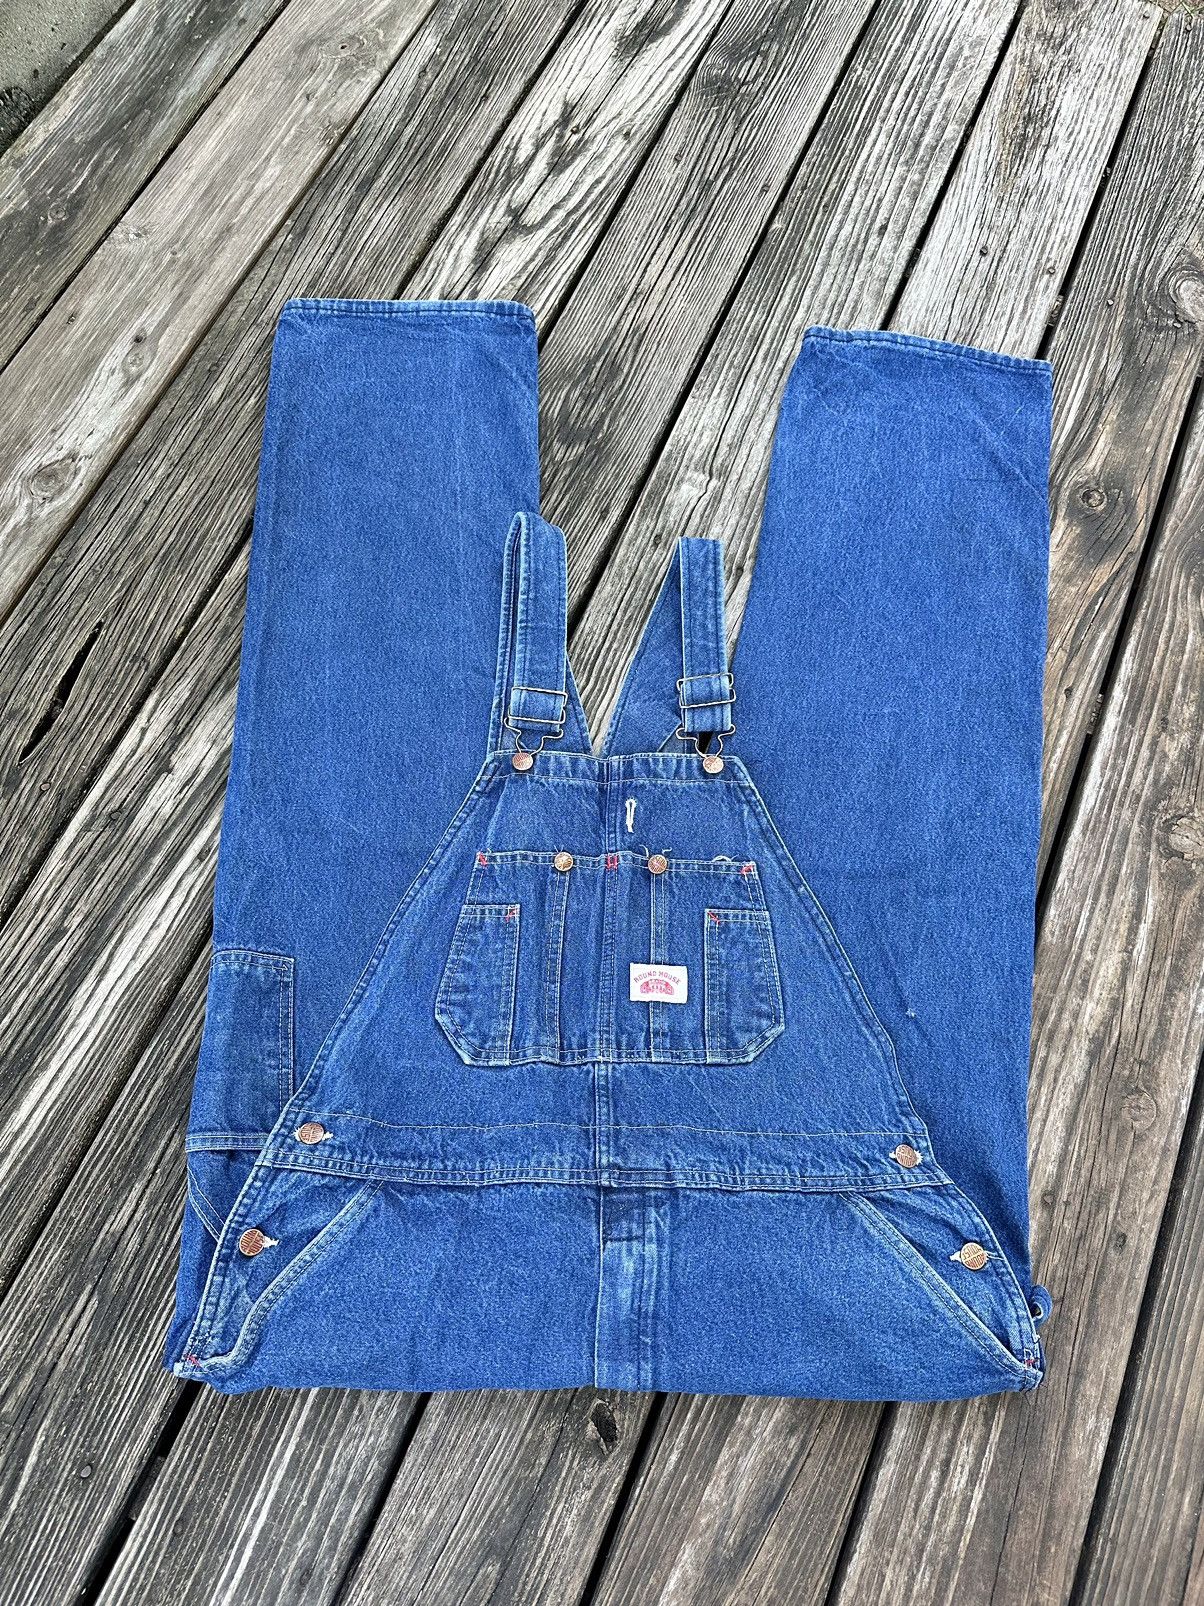 Streetwear Round House Overalls | Grailed